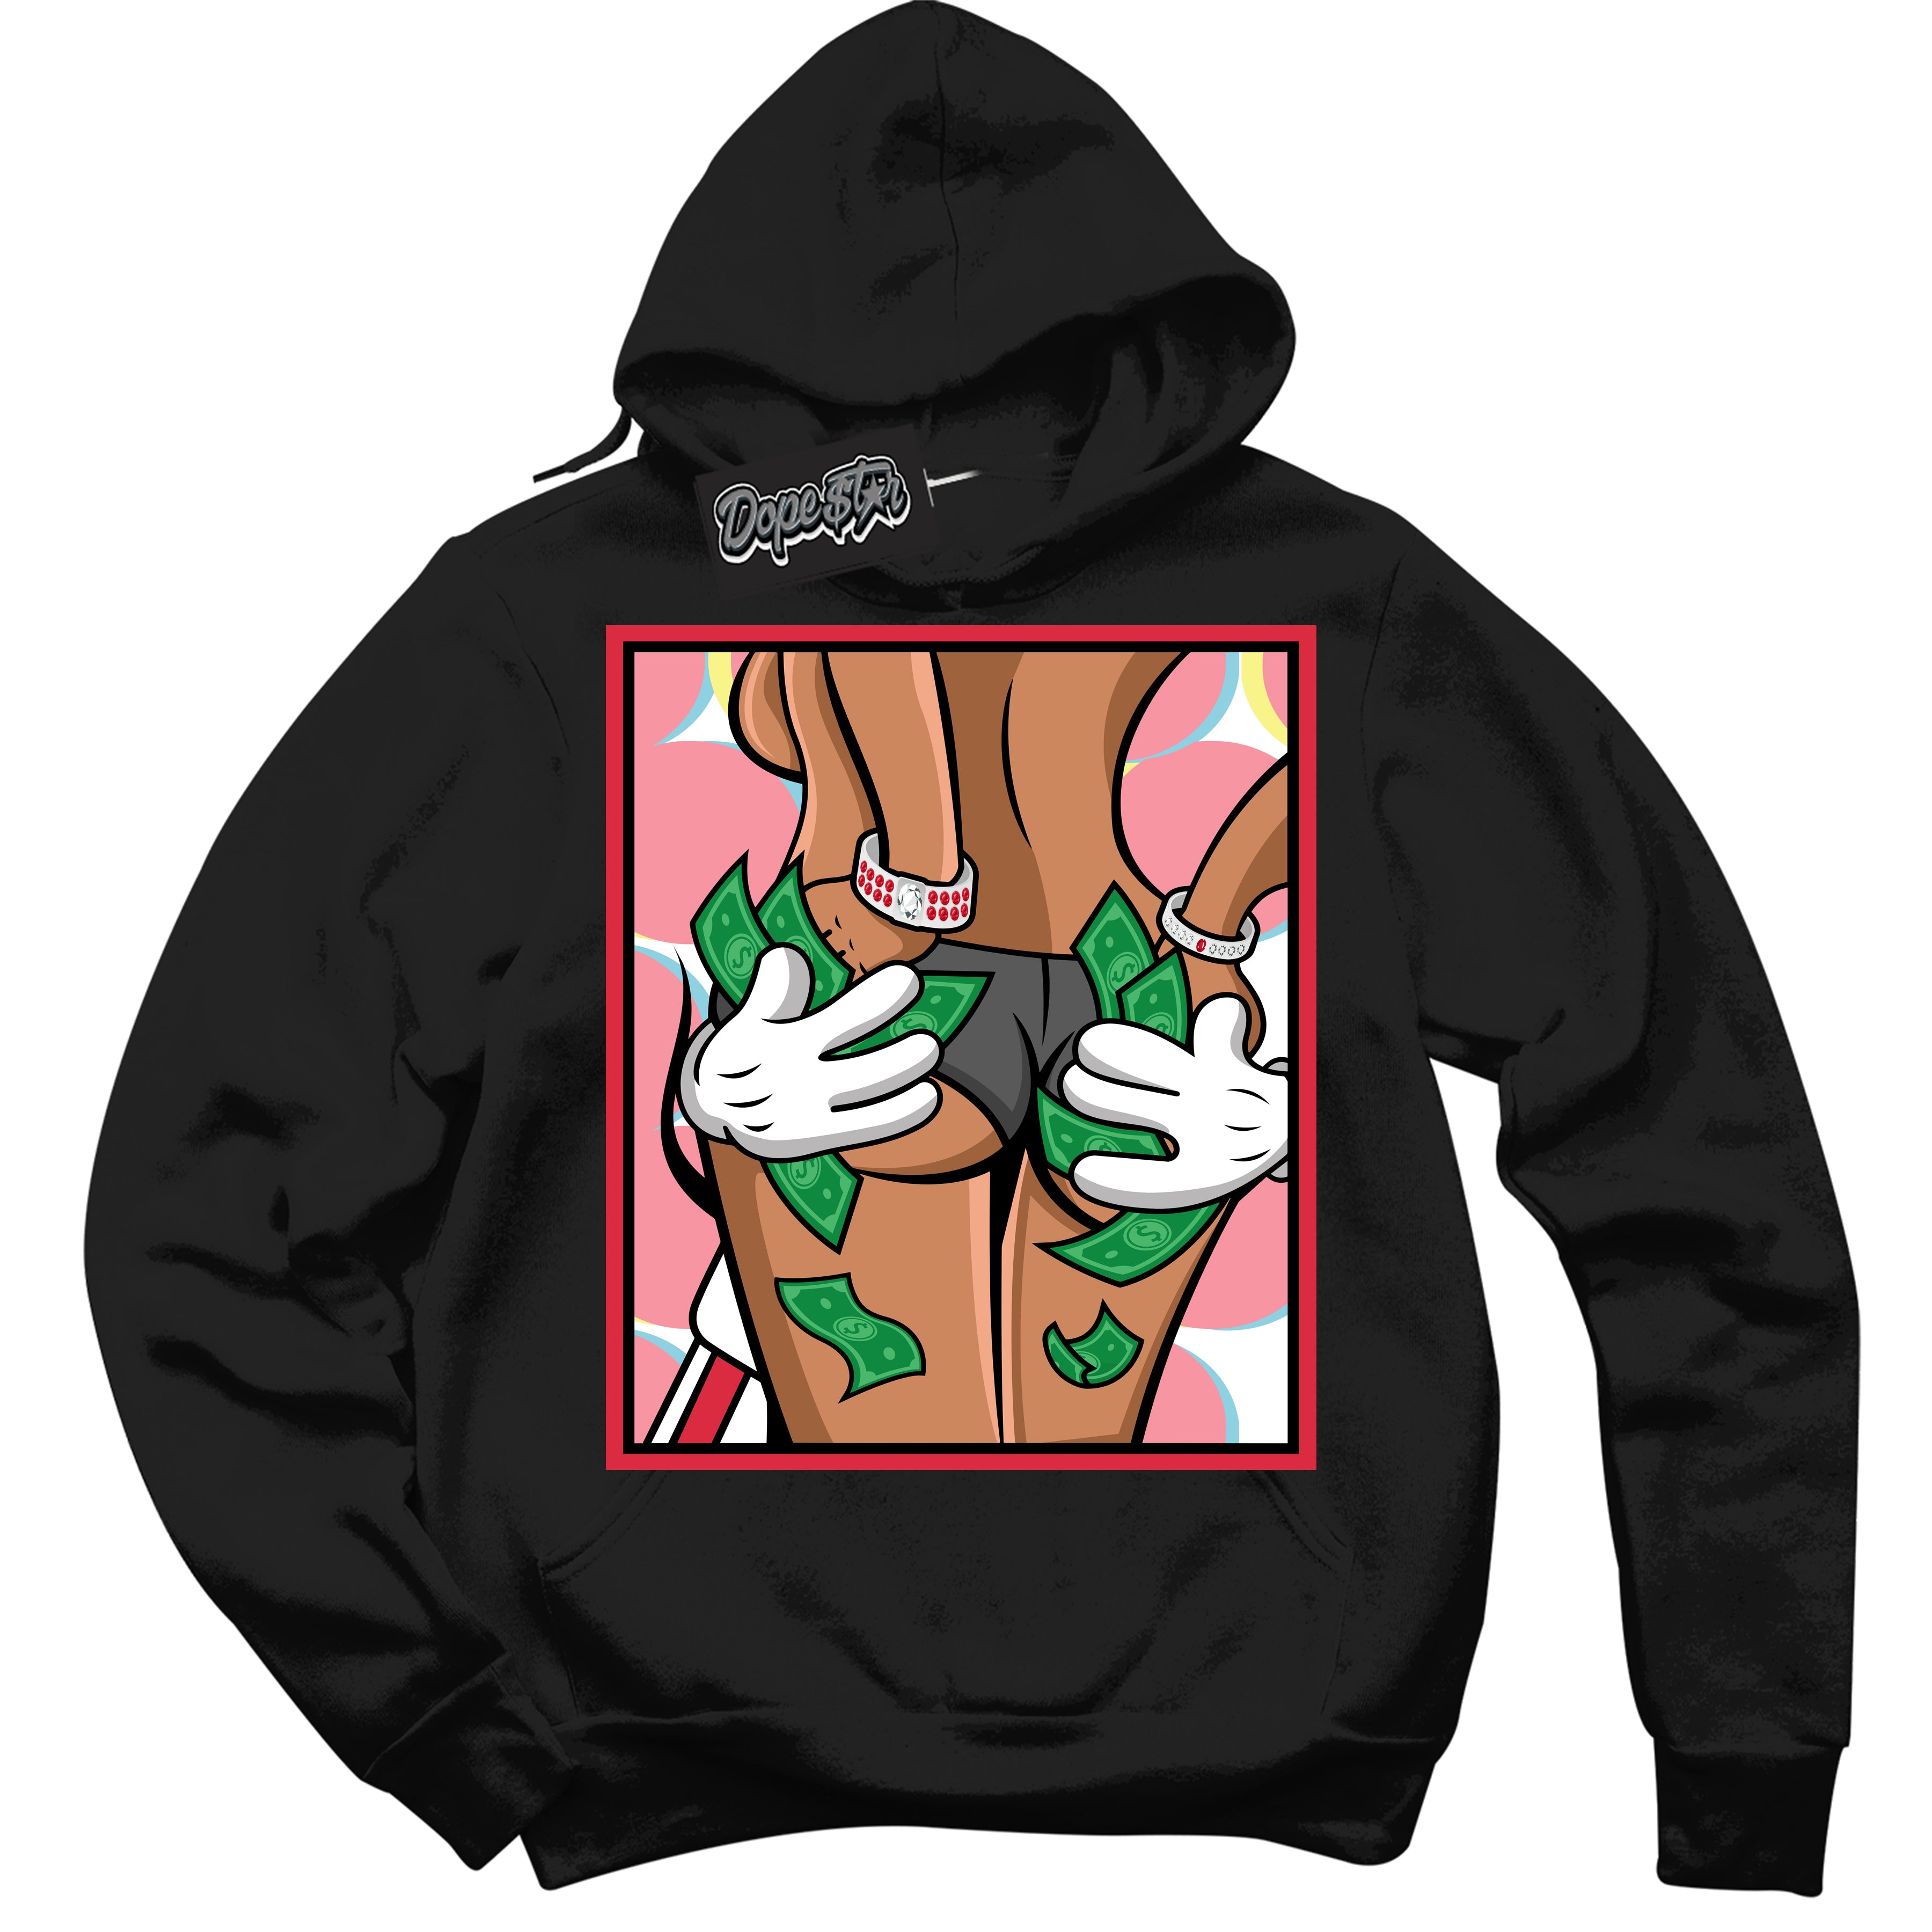 Cool Black Graphic DopeStar Hoodie with “ Money Hands “ print, that perfectly matches Spider-Verse 1s sneakers